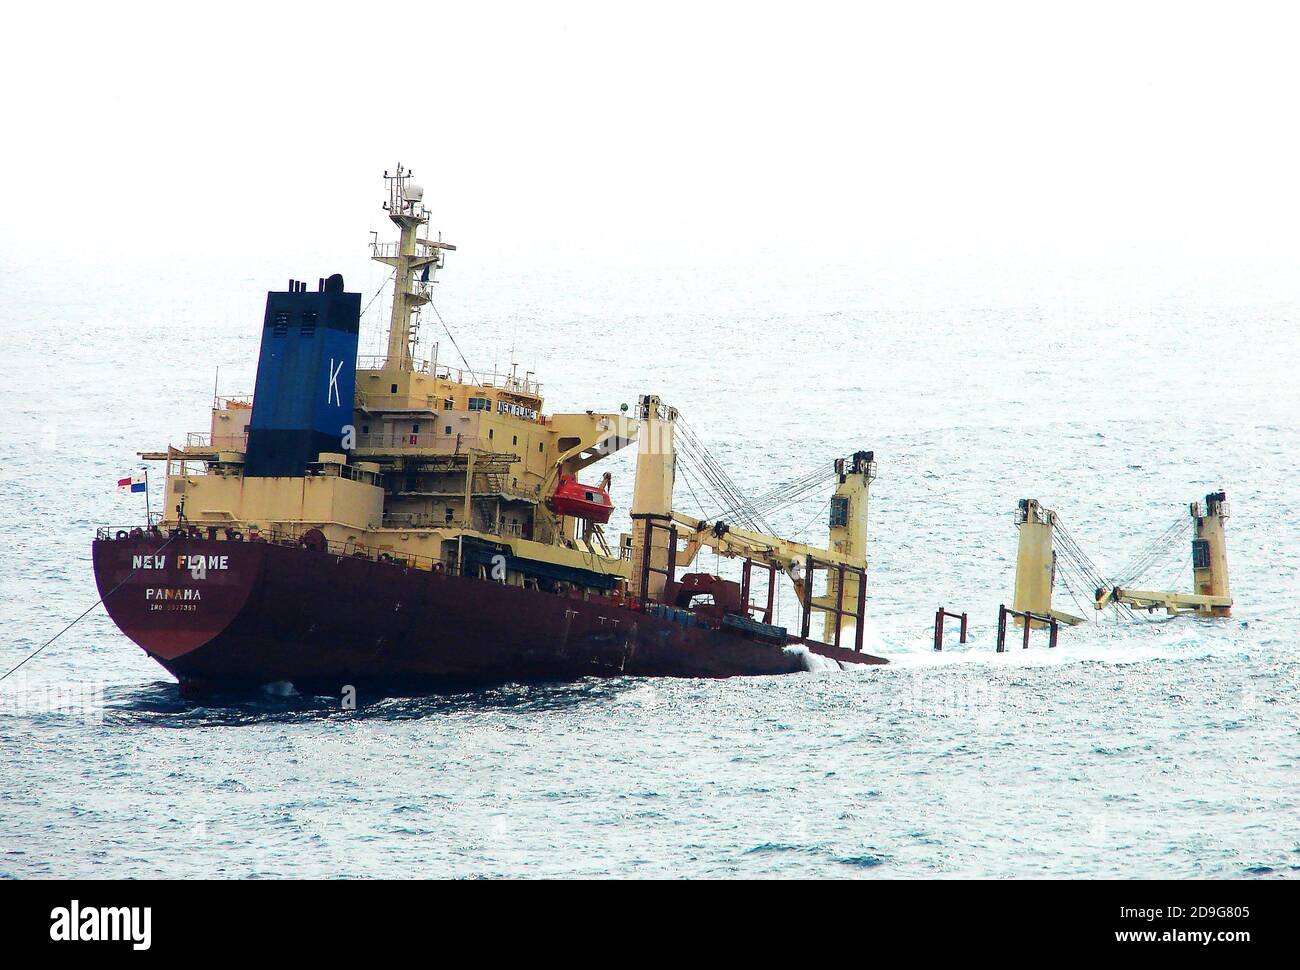 2007 photograph  -Wreck of the Panama Registered  MV NEW FLAME  lying half sunk off  Europa Point  Lighthouse, Gibraltar   -- The  Panamanian bulk-carrier cargo ship collided with  the   stern of the Torm Gertrud,a double-hulled Danish petroleum tanker on 12 August 2007. She ended up partially submerged in the Strait of Gibraltar, breaking  in two in December 2007 and couldn't be recovered. The cargo was salvaged and the stern section removed for scrap.  The Captain was arrested for departing without permission. It was built in 1994 &originally named Skaustrand. Stock Photo